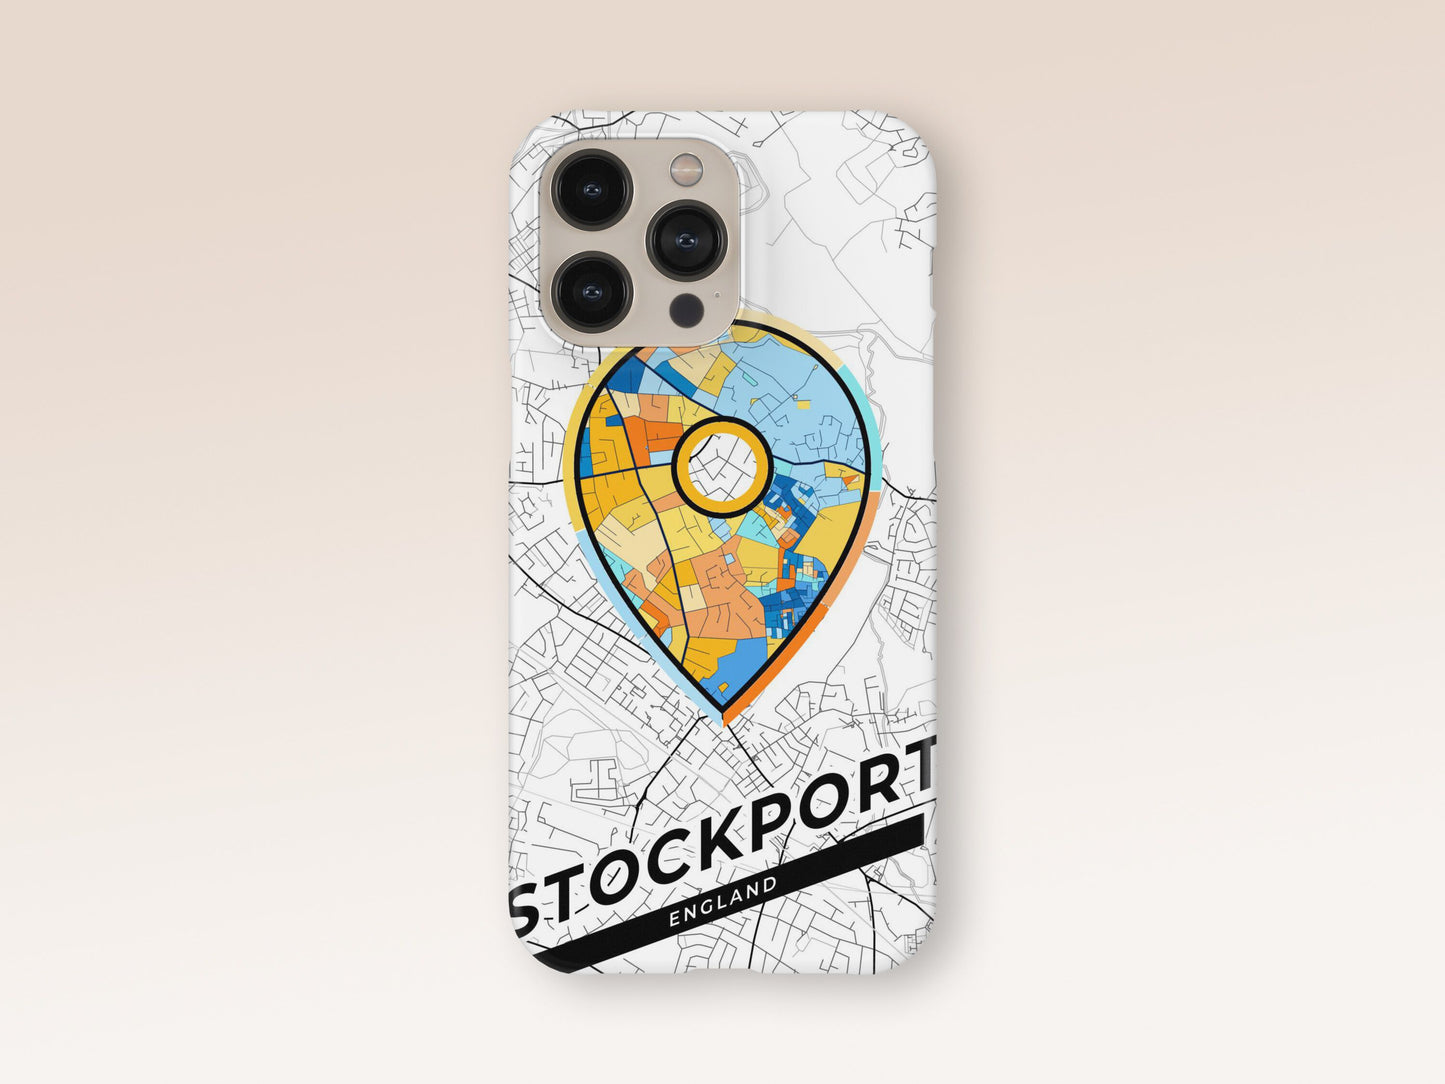 Stockport England slim phone case with colorful icon 1